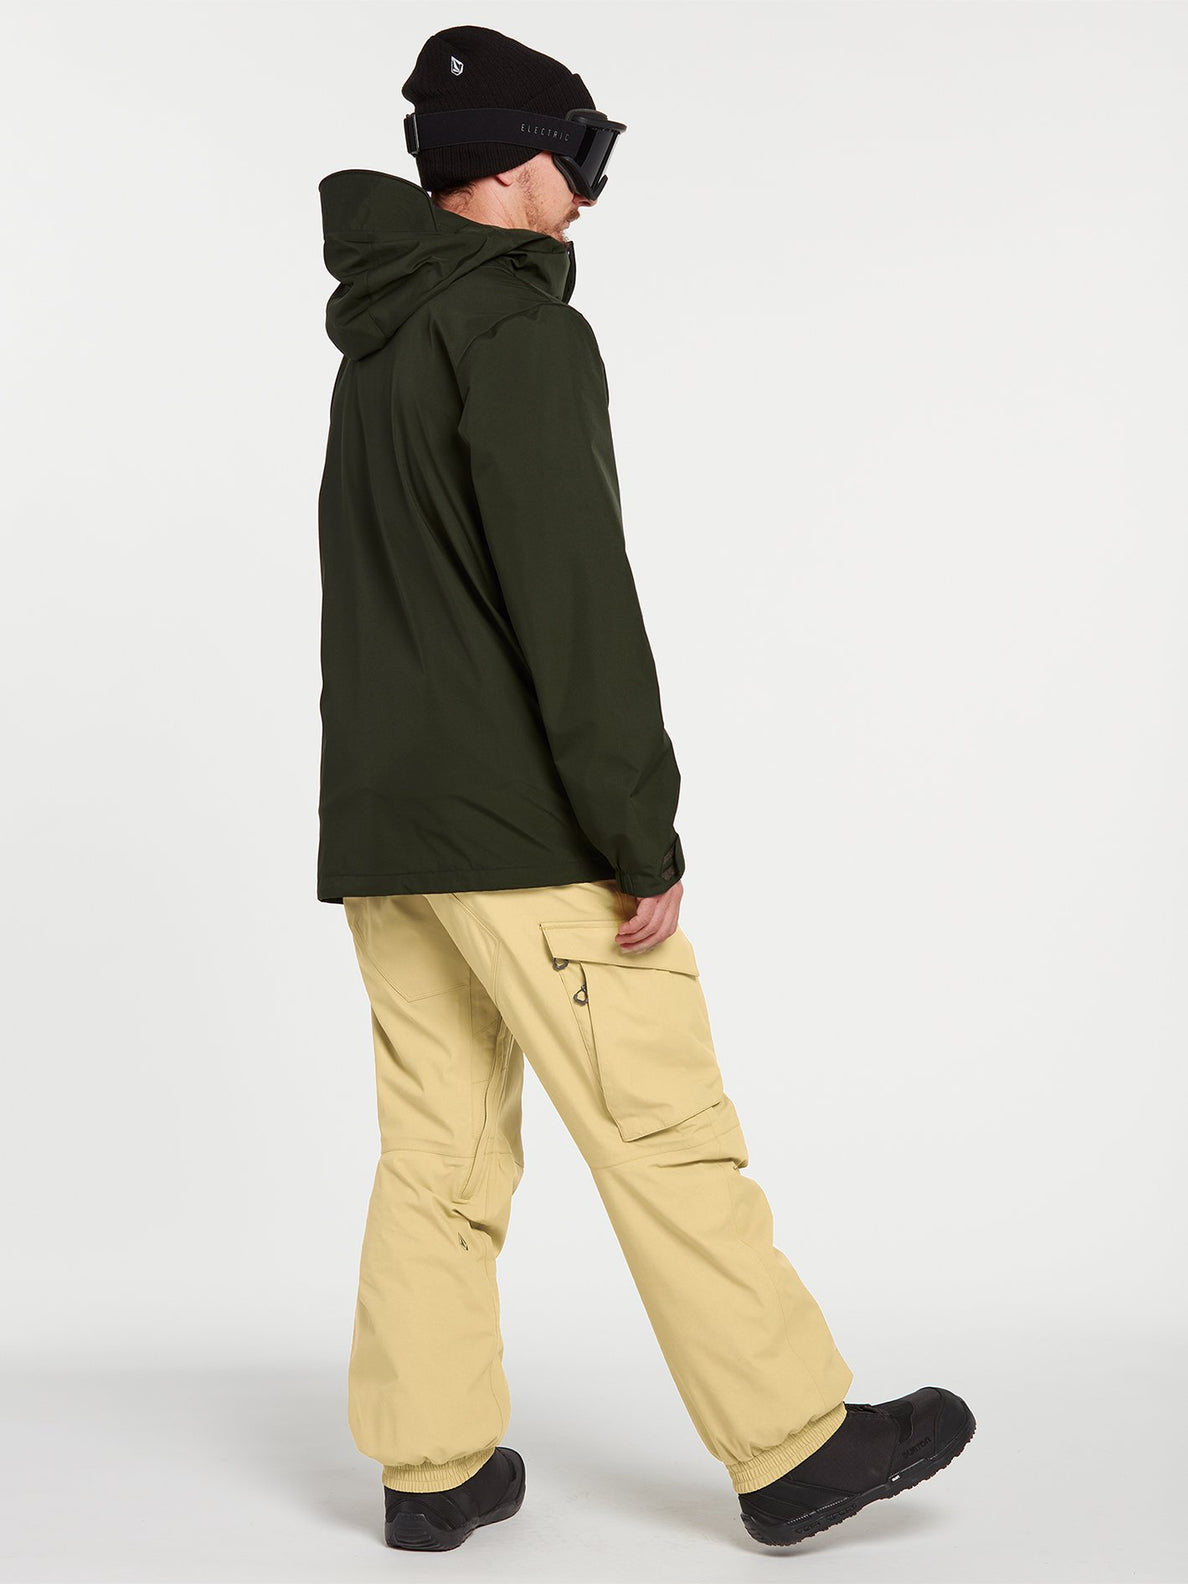 Stone Gore-Tex Trousers - GOLD (G1352206_GLD) [6]